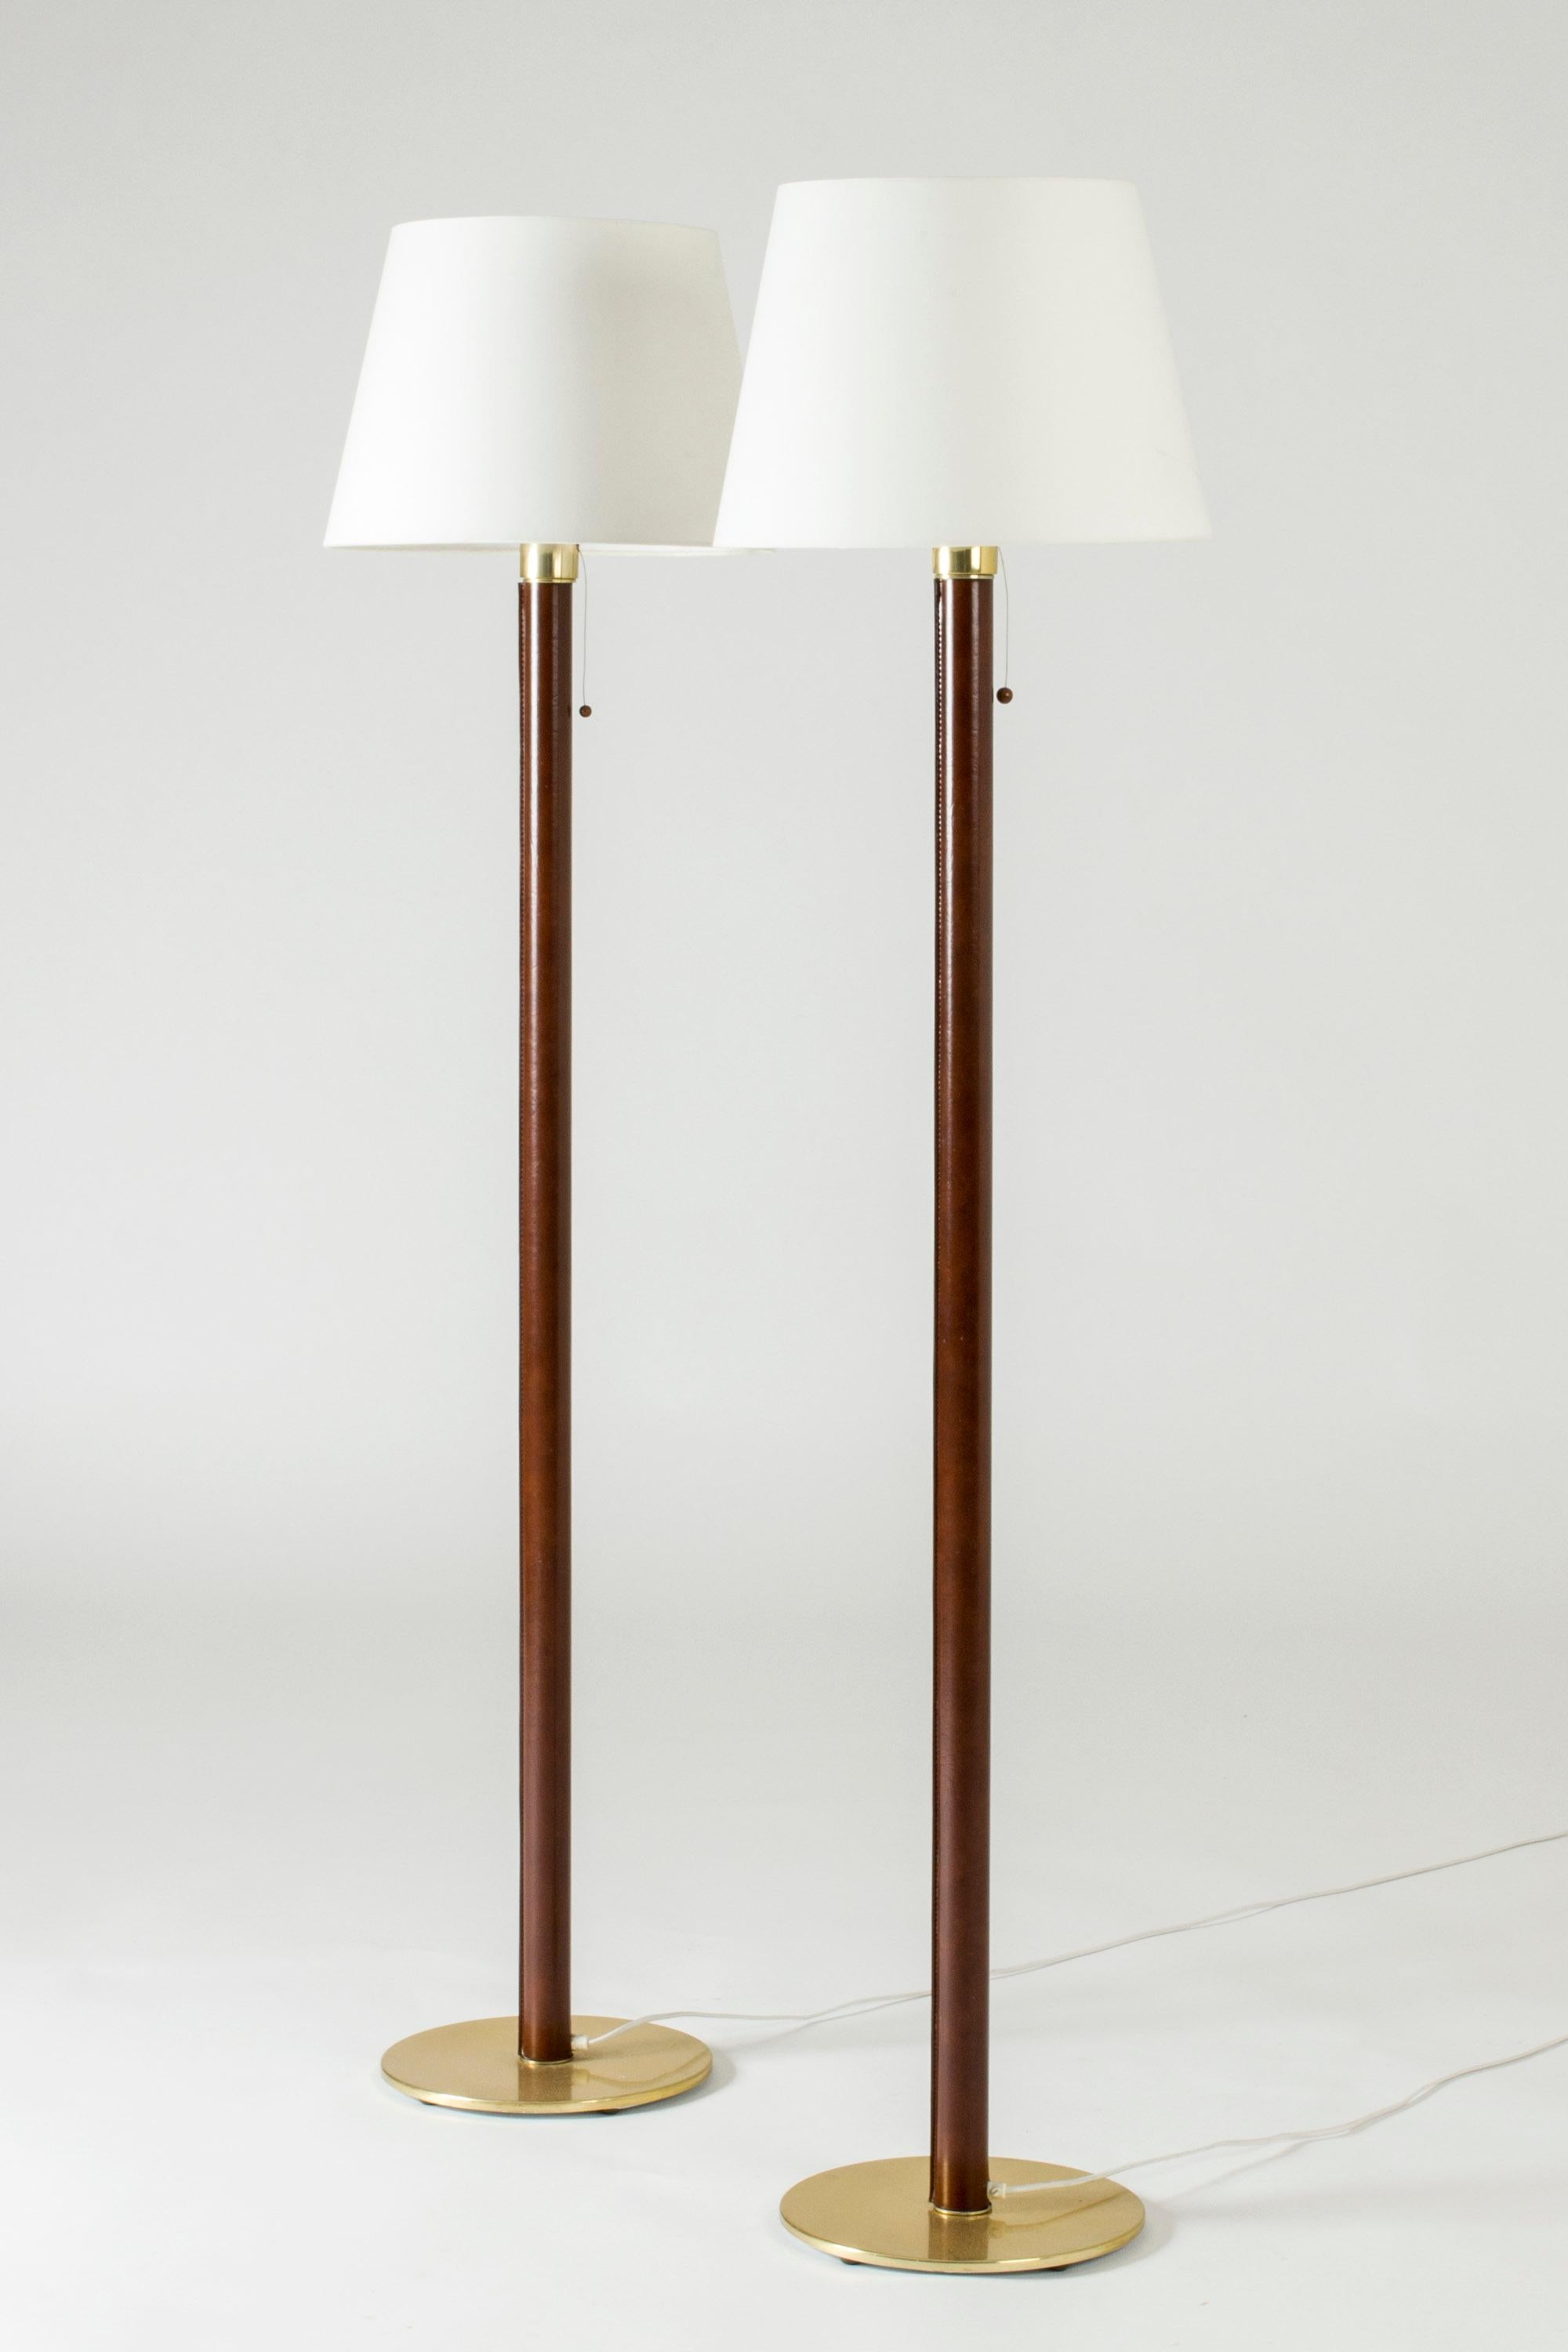 Pair of elegant floor lamps from Falkenbergs Belysning, made from brass. Stems dressed with brown faux leather, visible decorative white seams. Drawstring light switches with balls at the ends.